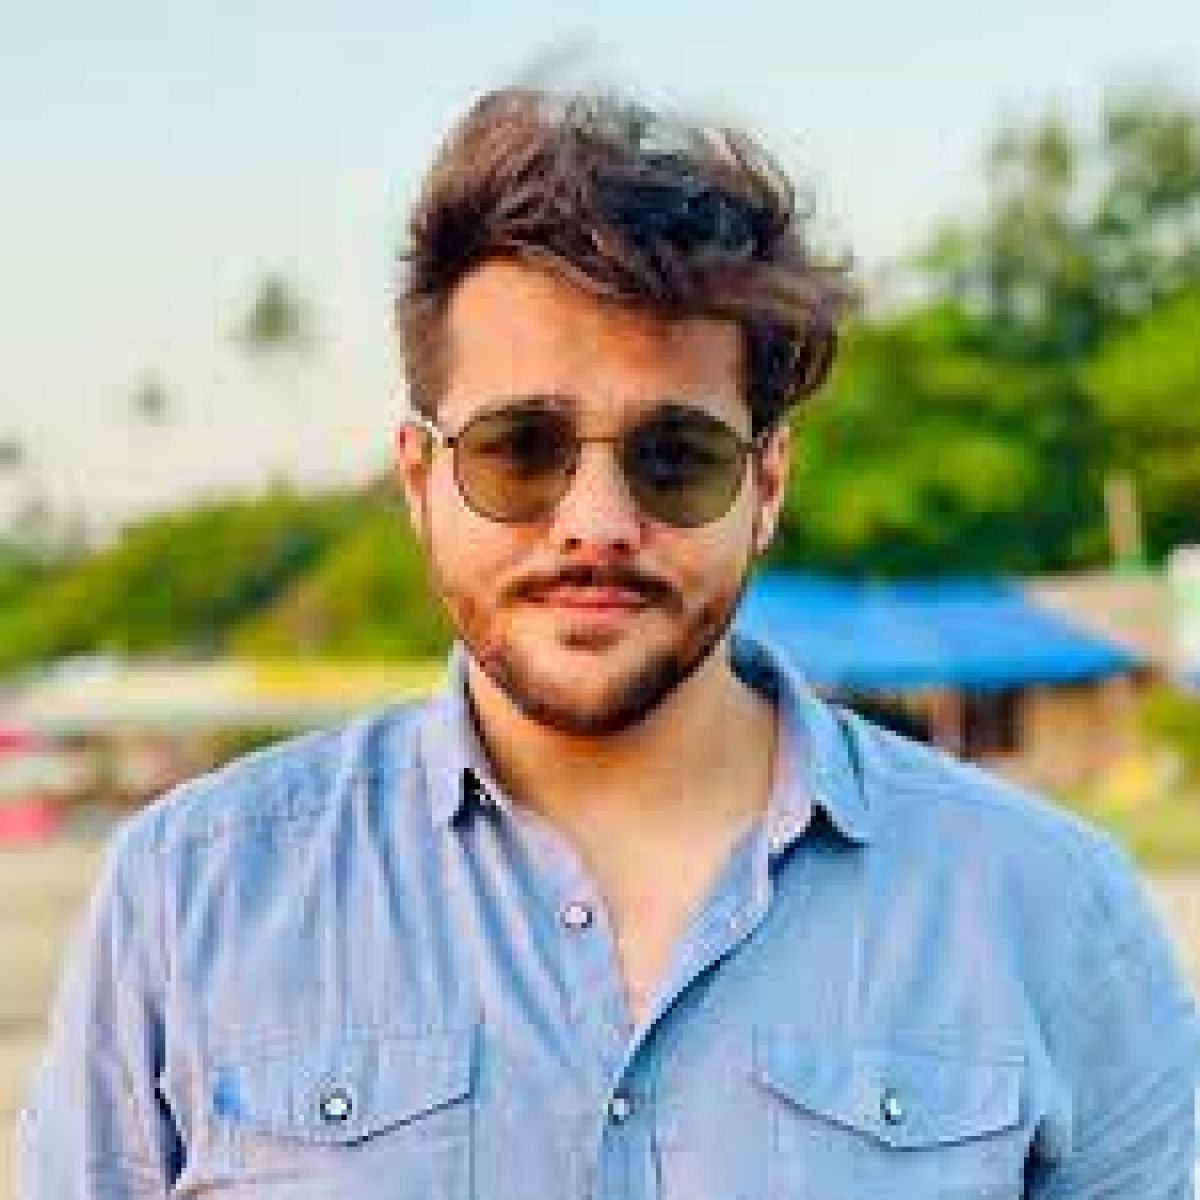 How did engineering student Ashish Chanchlani become a hit YouTuber?